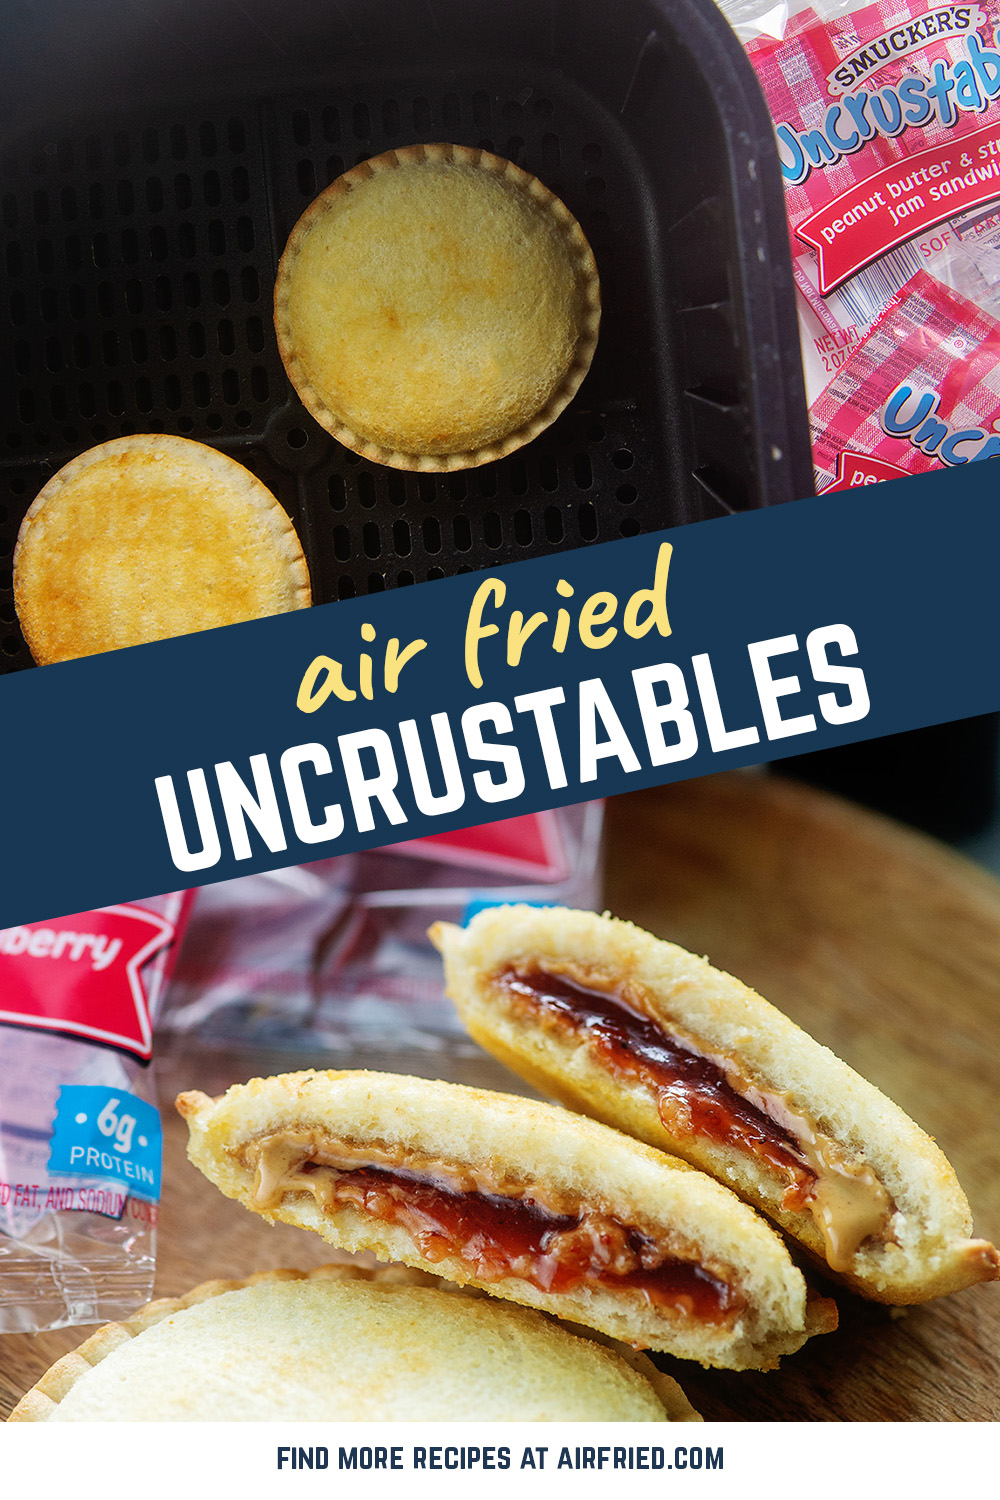 These air fried uncrustables are amazing with their warm peanut butter and jelly center!